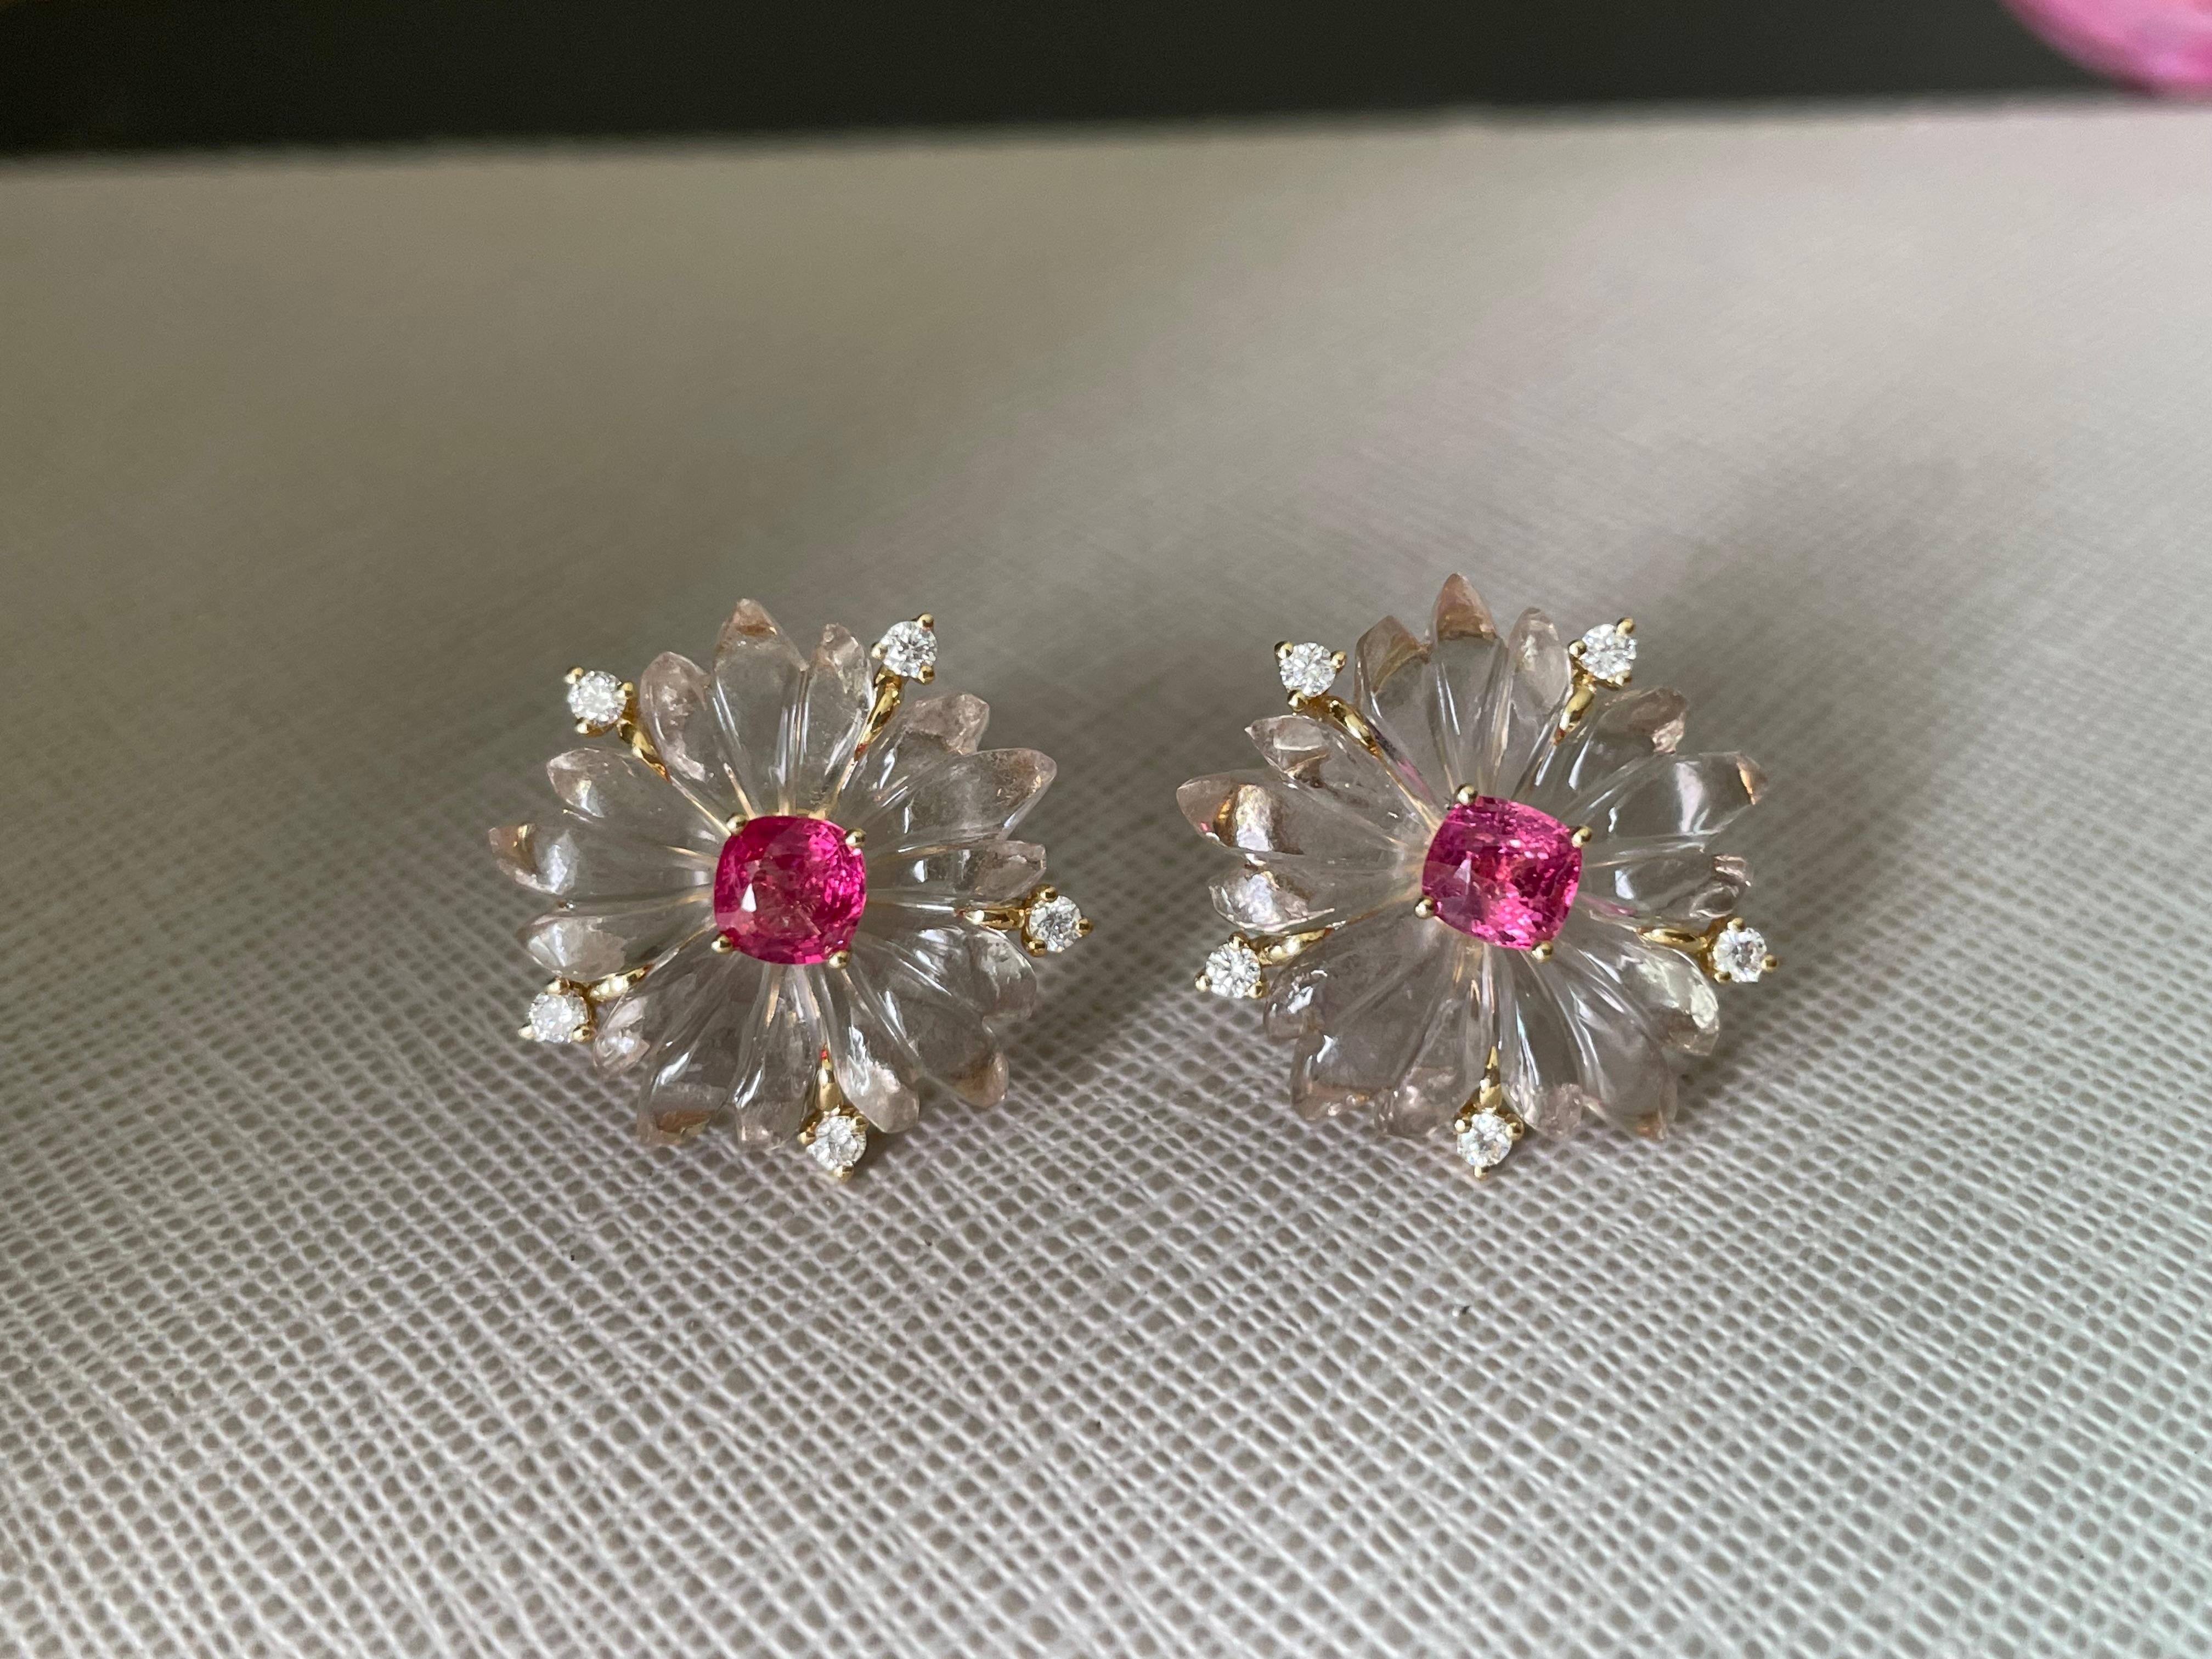 We crafted these lovely cluster flower earrings from scratch, starting with raw gemstones that were polished into fine gems with unlimited good wishes, aiming to imbue the wearer with feelings of strength, courage, and love.

Each earring is set